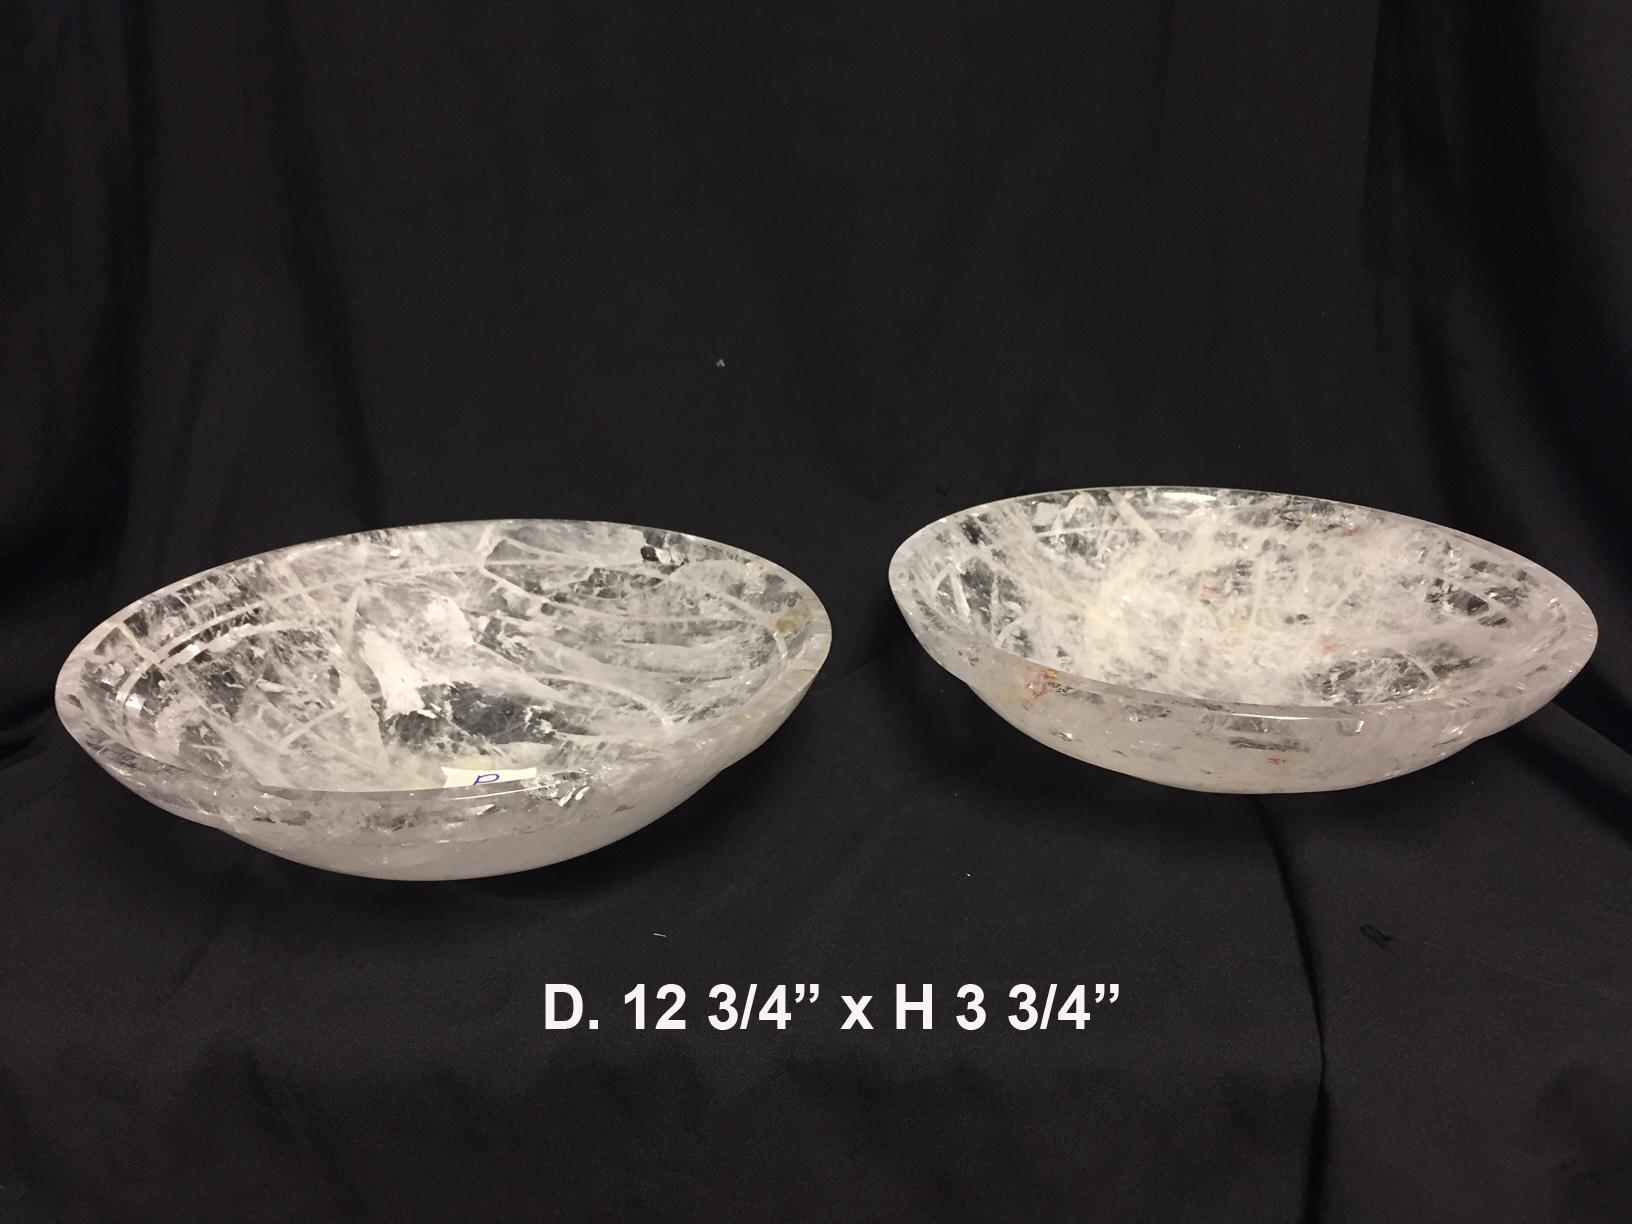 Exquisite pair of modern style high quality hand carved and hand polished rock crystal bowls.
These matchless pieces of rock crystal are hand carved and hand polished from all natural semi-precious stones.
Meticulous attention is always given to